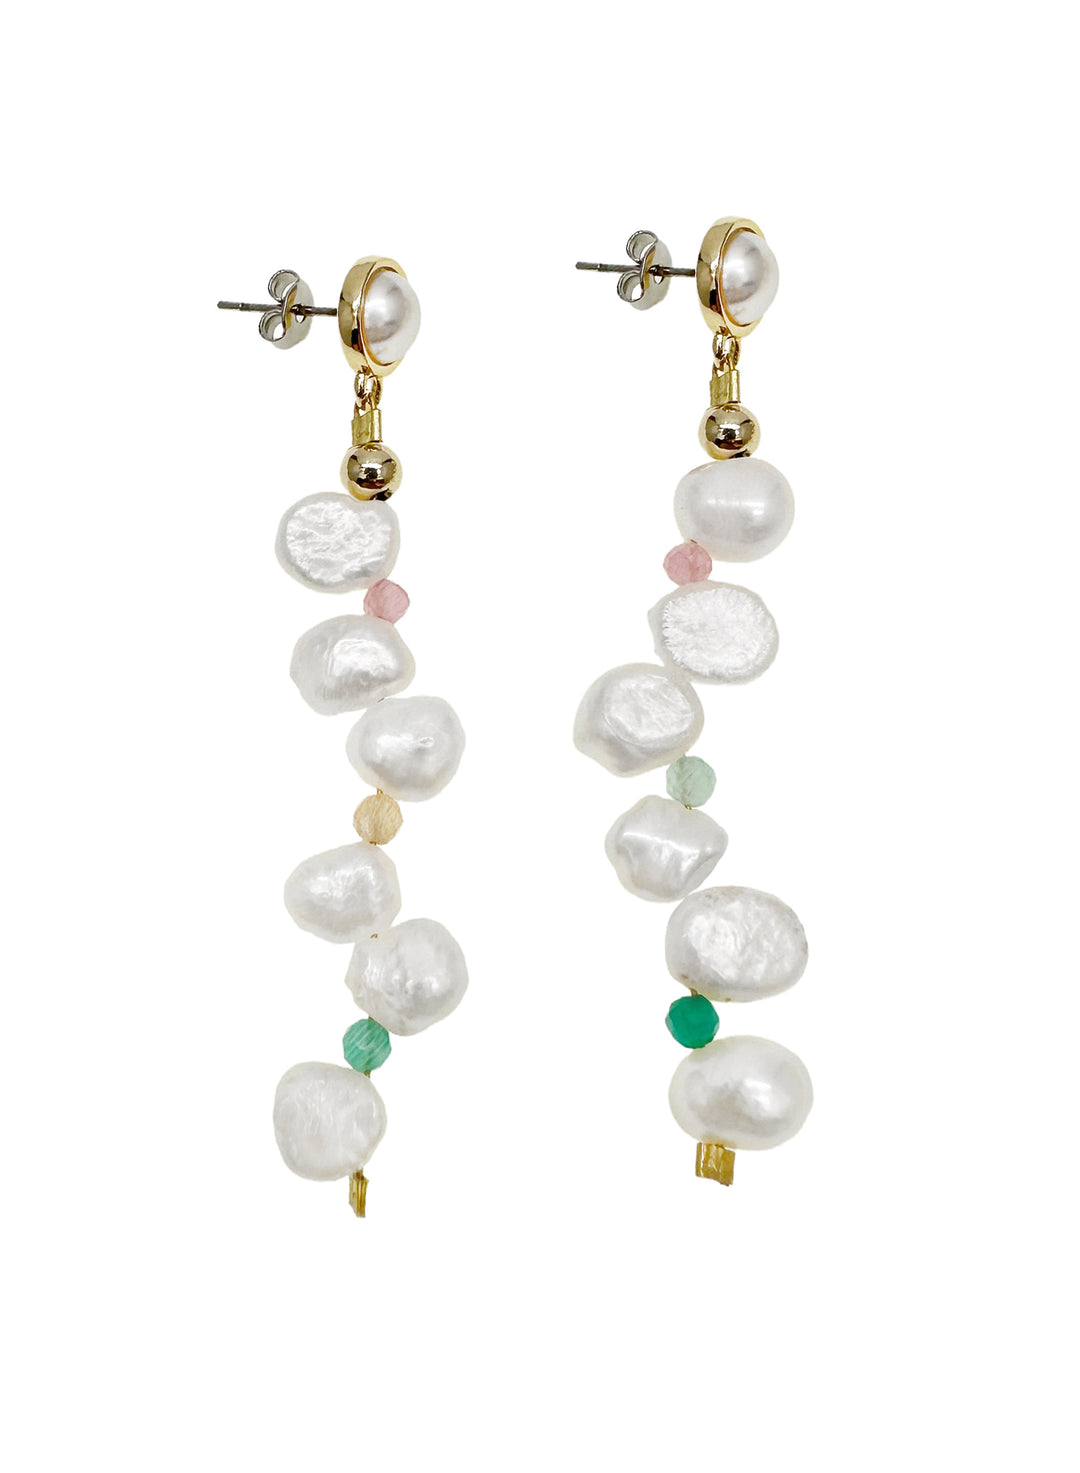 Flower Petal Freshwater Pearls With Colorful Stones Earrings LE035 - FARRA